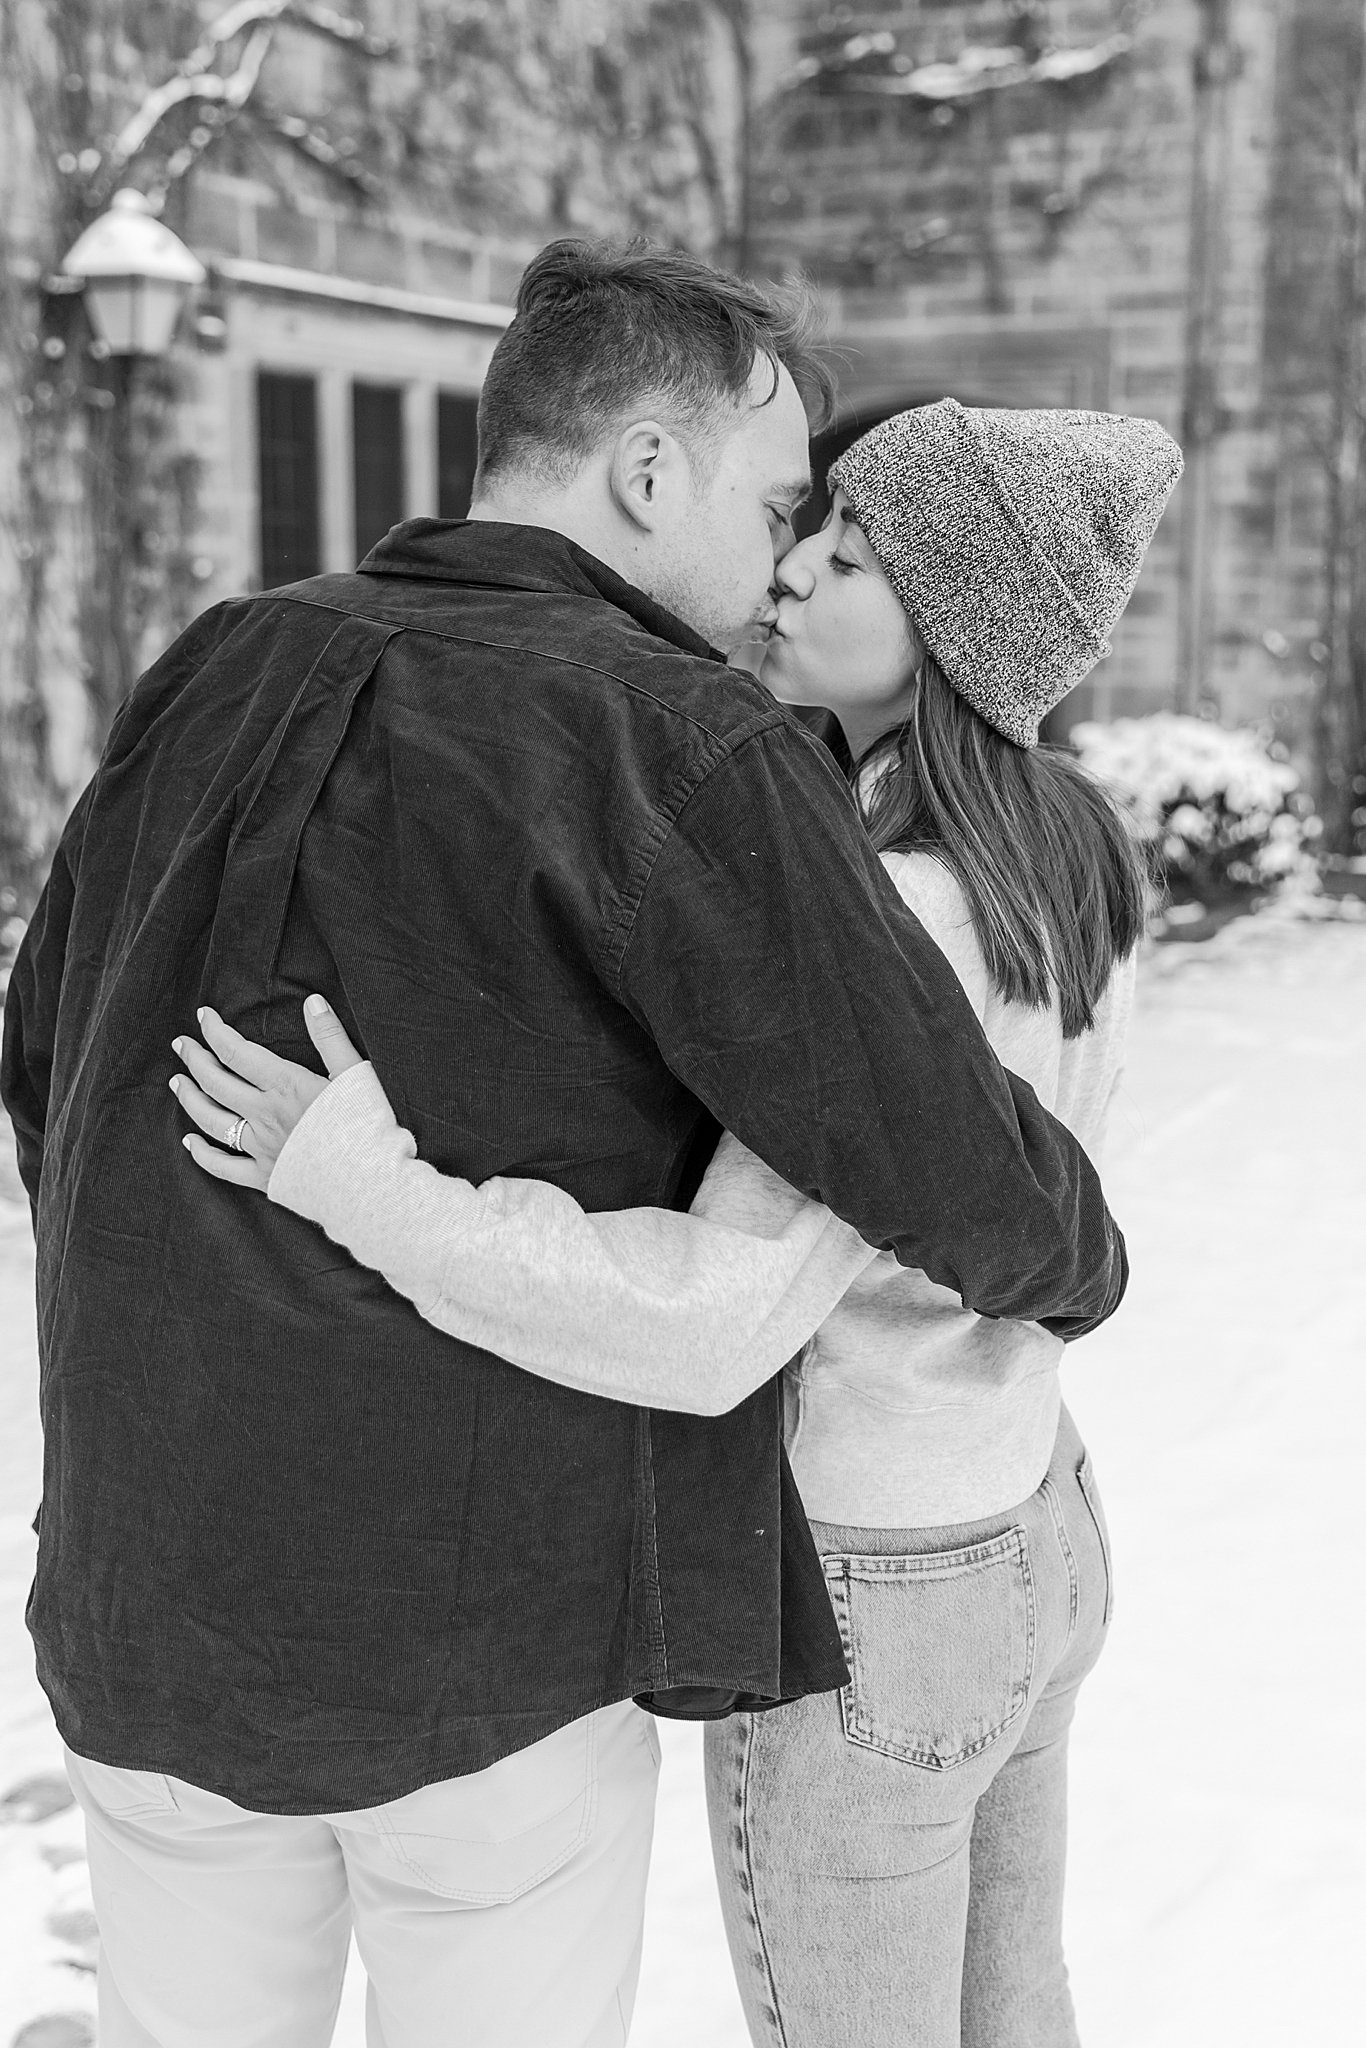 detroit-wedding-photographer-winter-engagement-photos-at-edsel-and-eleanor-ford-house-in-grosse-pointe-mi-by-courtney-carolyn-photography_0023.jpg